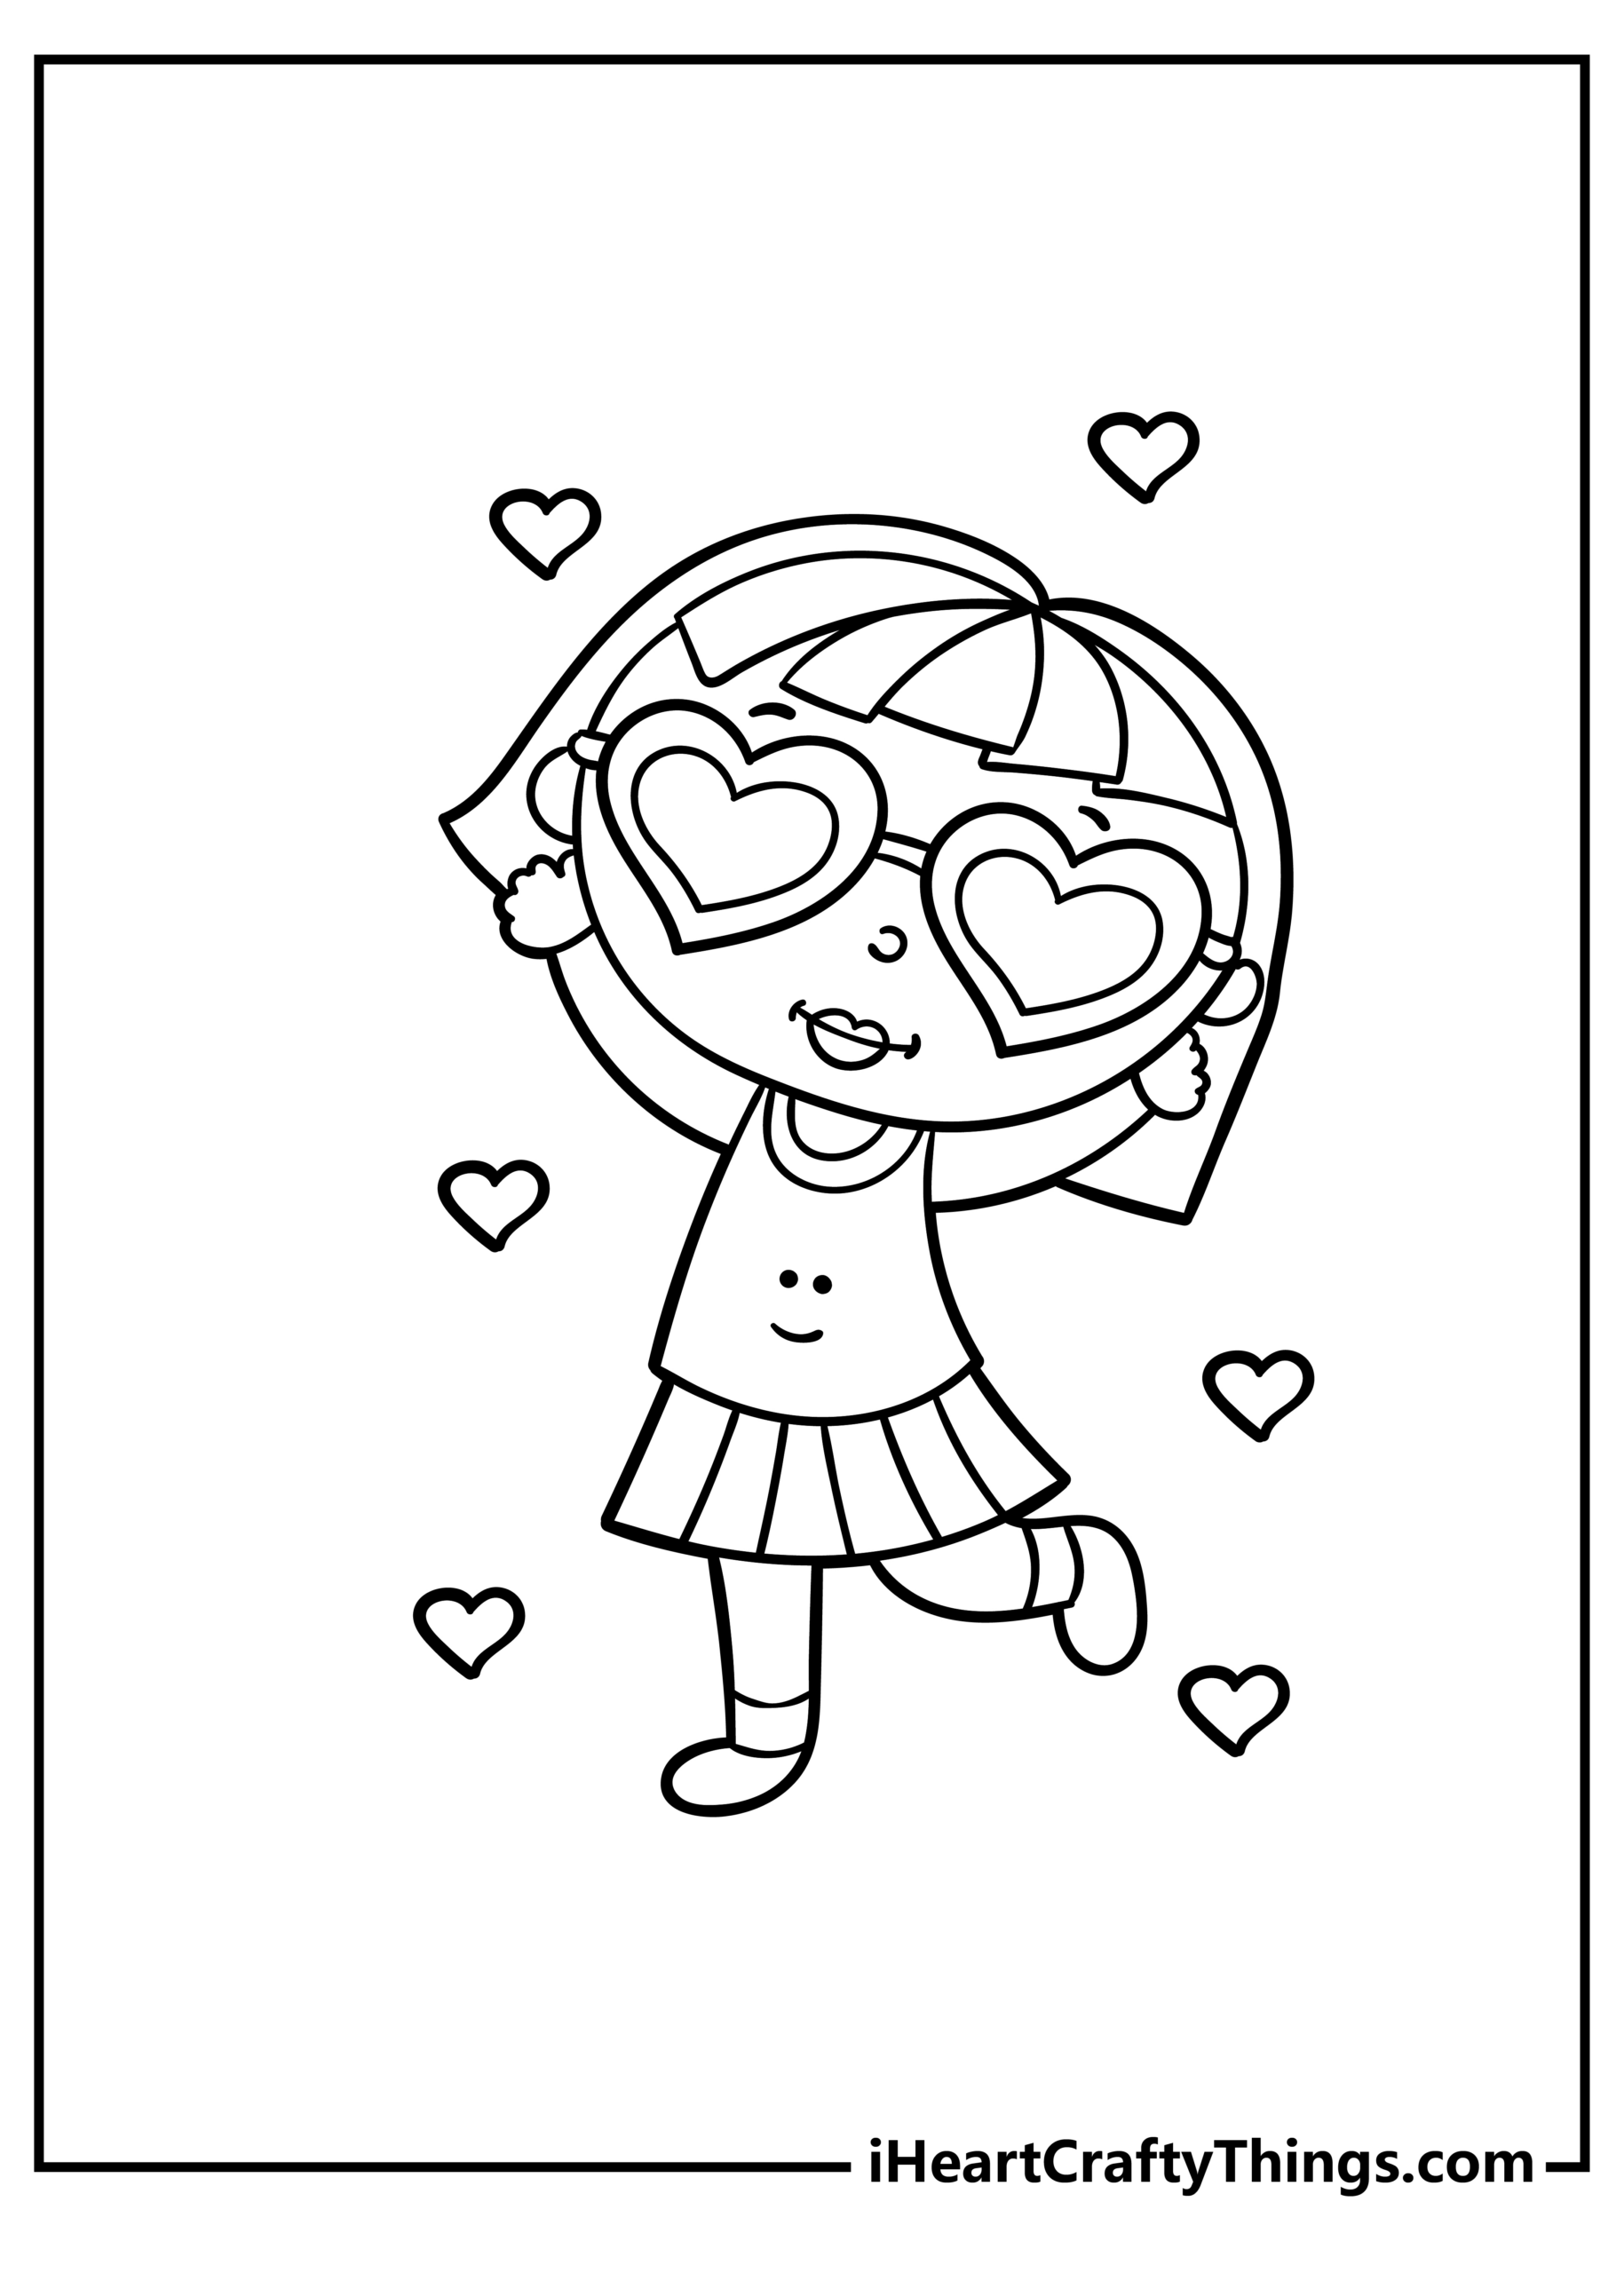 Cute Coloring Pages For Girls (100% Free Printables) with Free Printables for Girls